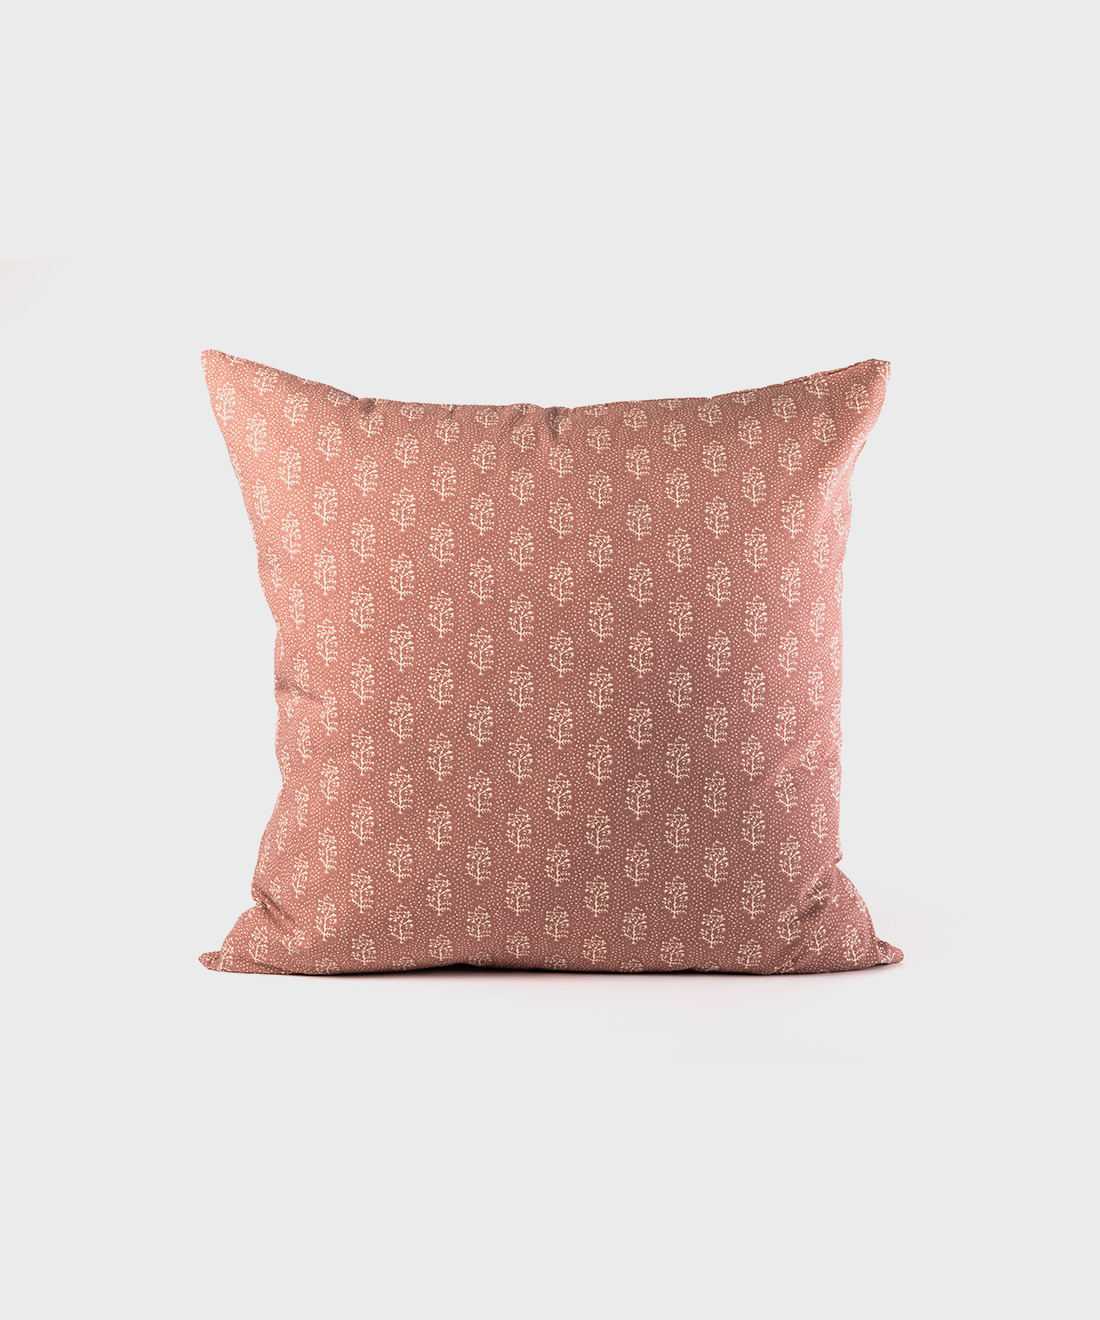 Clove Scatter Cushion in Mulberry, Cotton